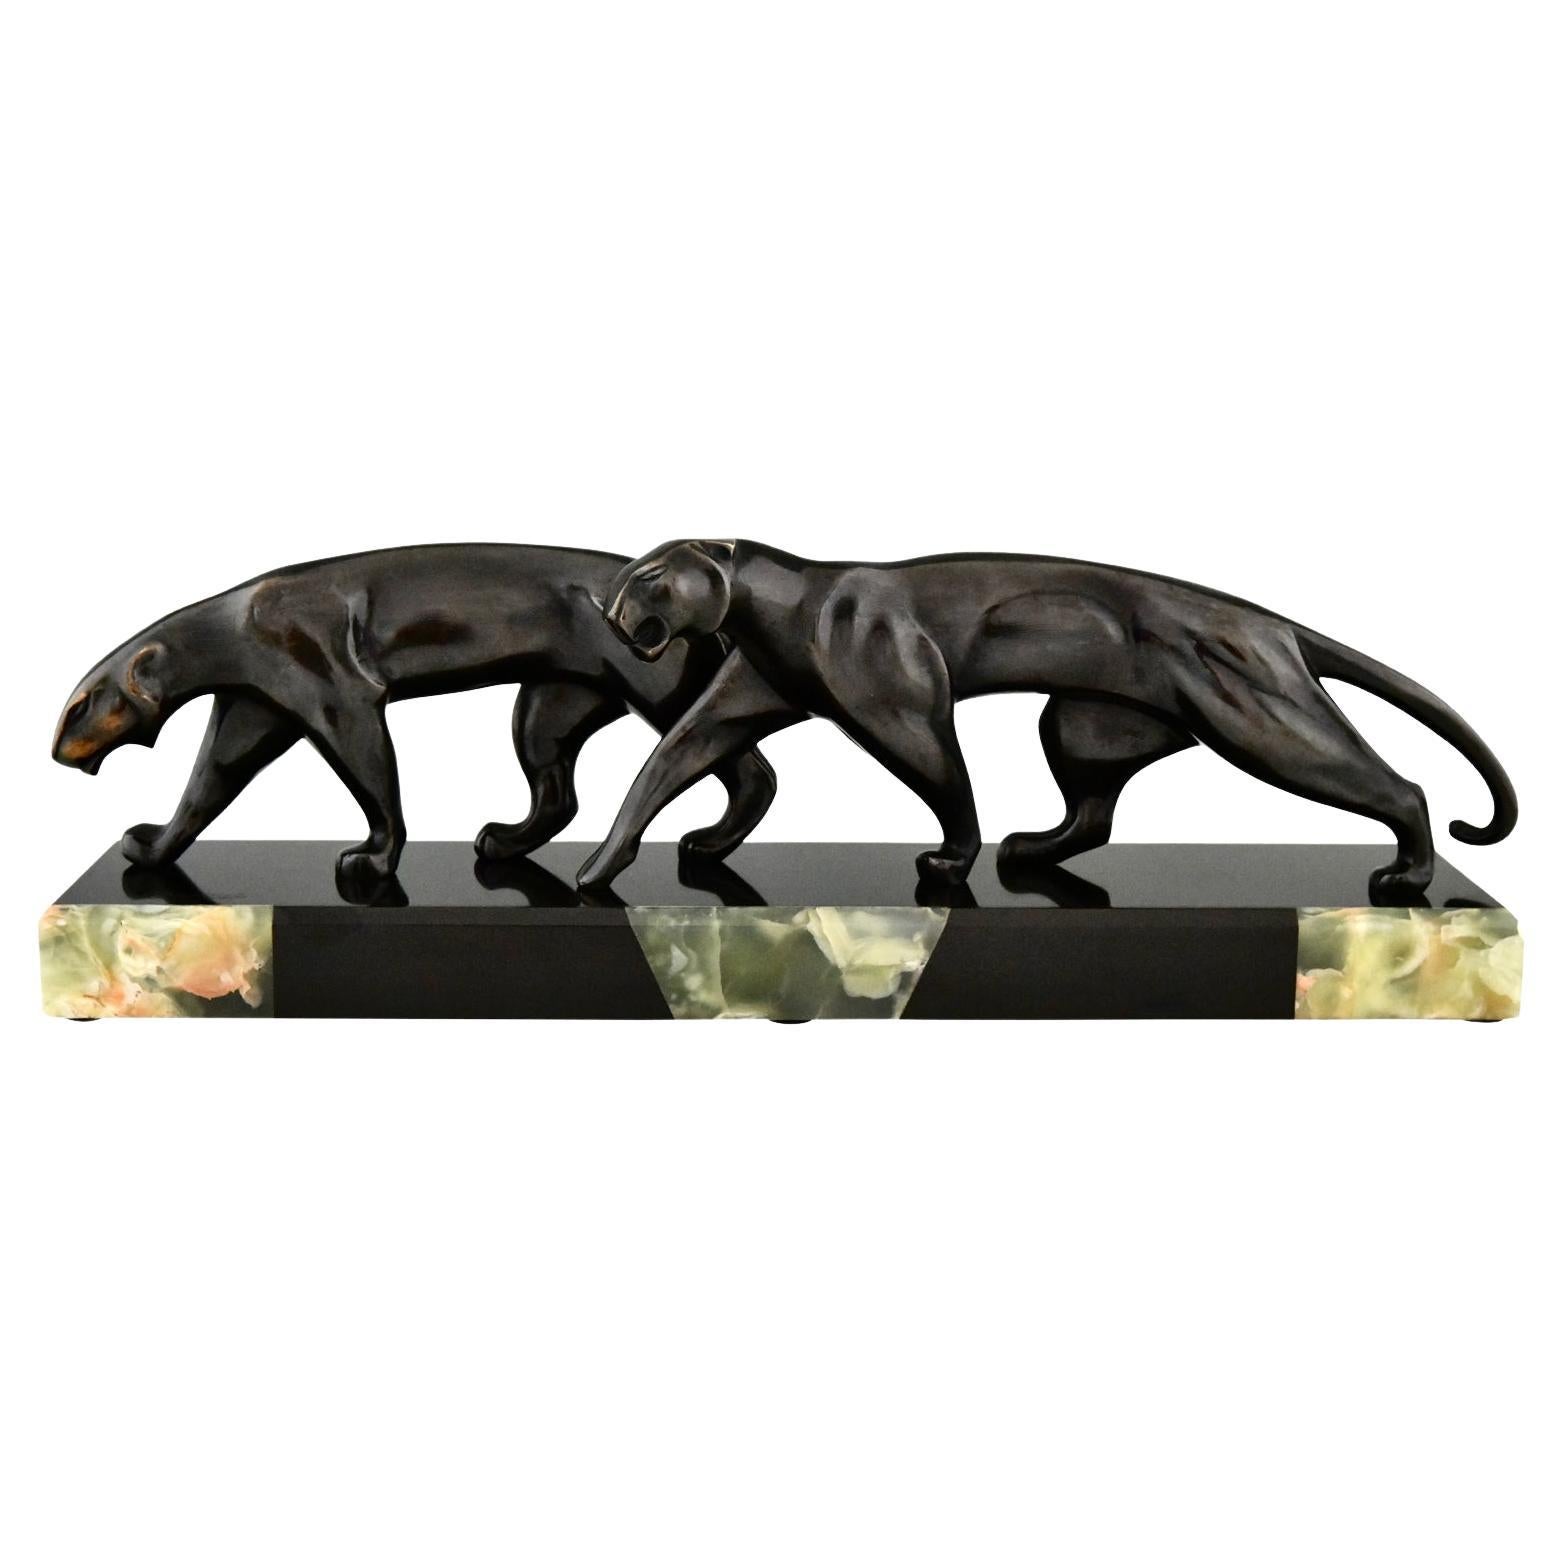 Art Deco bronze sculpture two panthers signed by Michel Decoux 1920